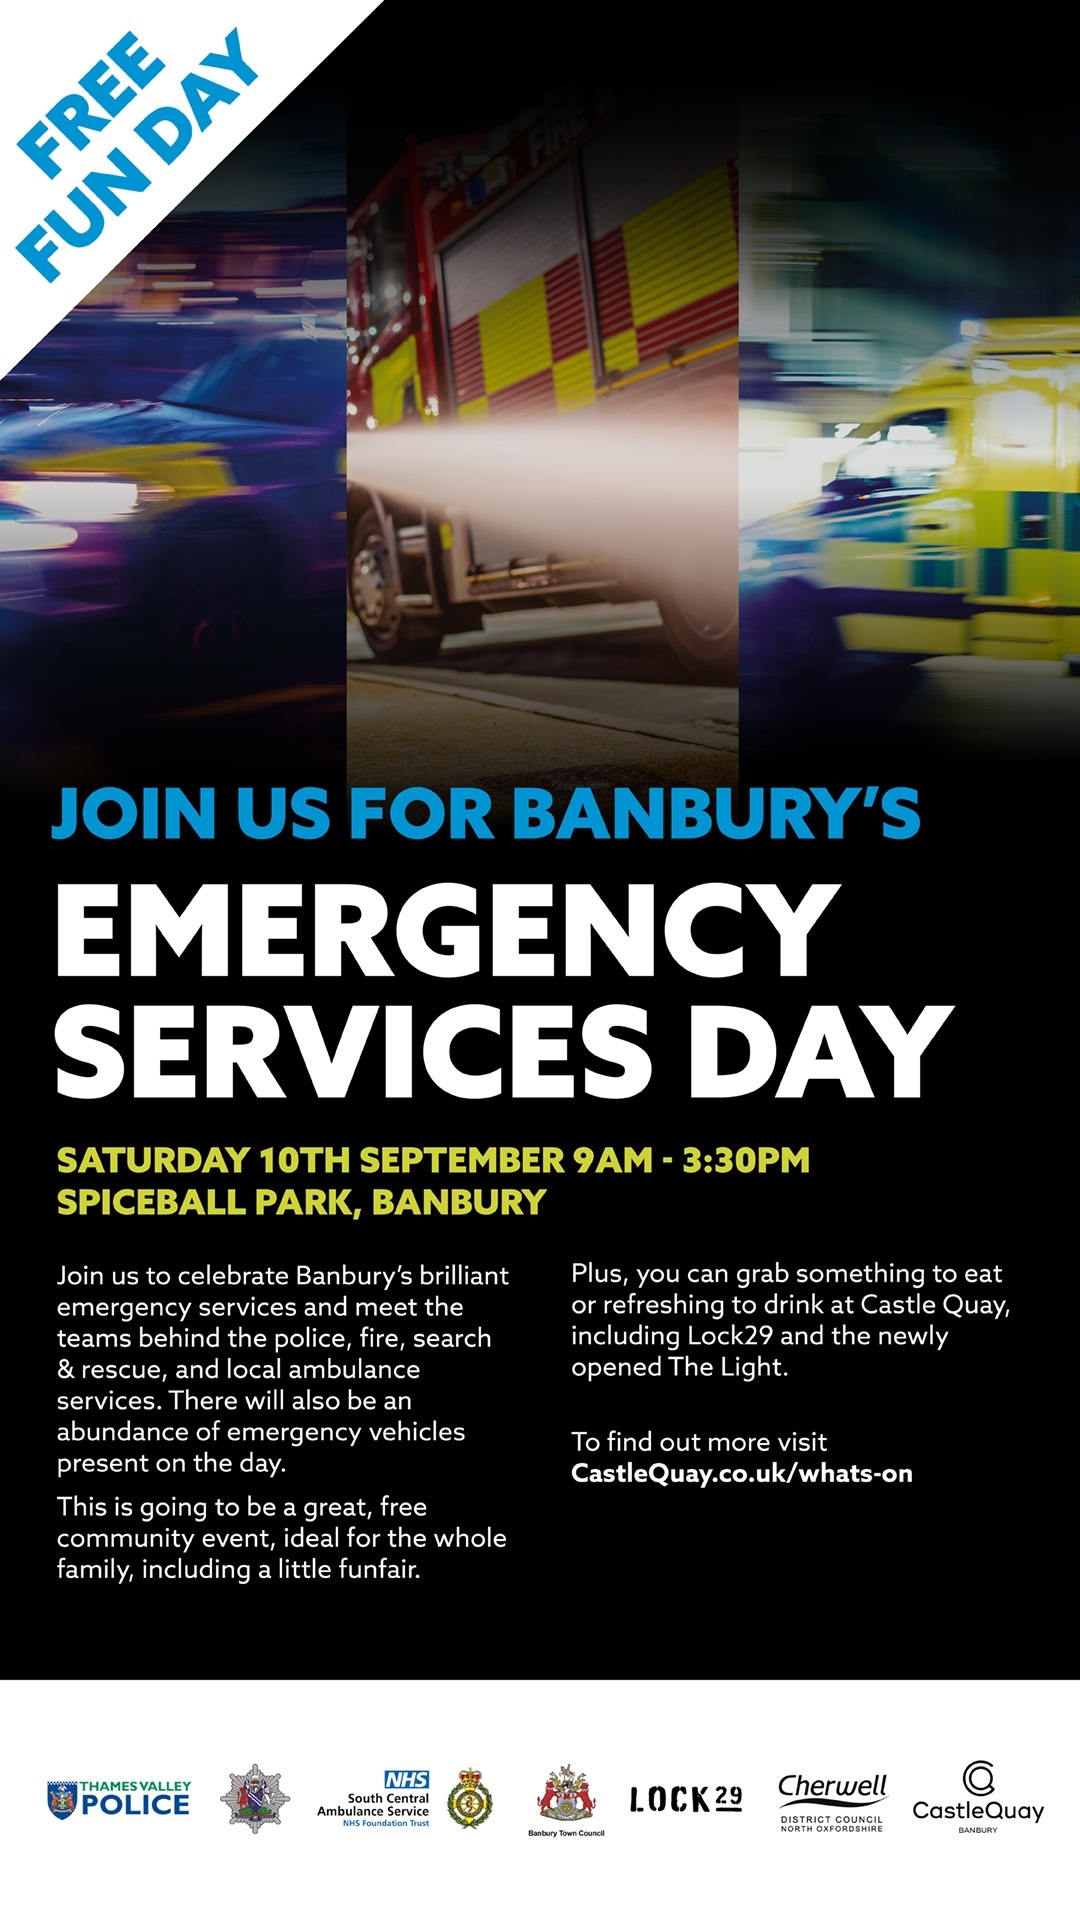 Banbury Emergency Services day - 10th September